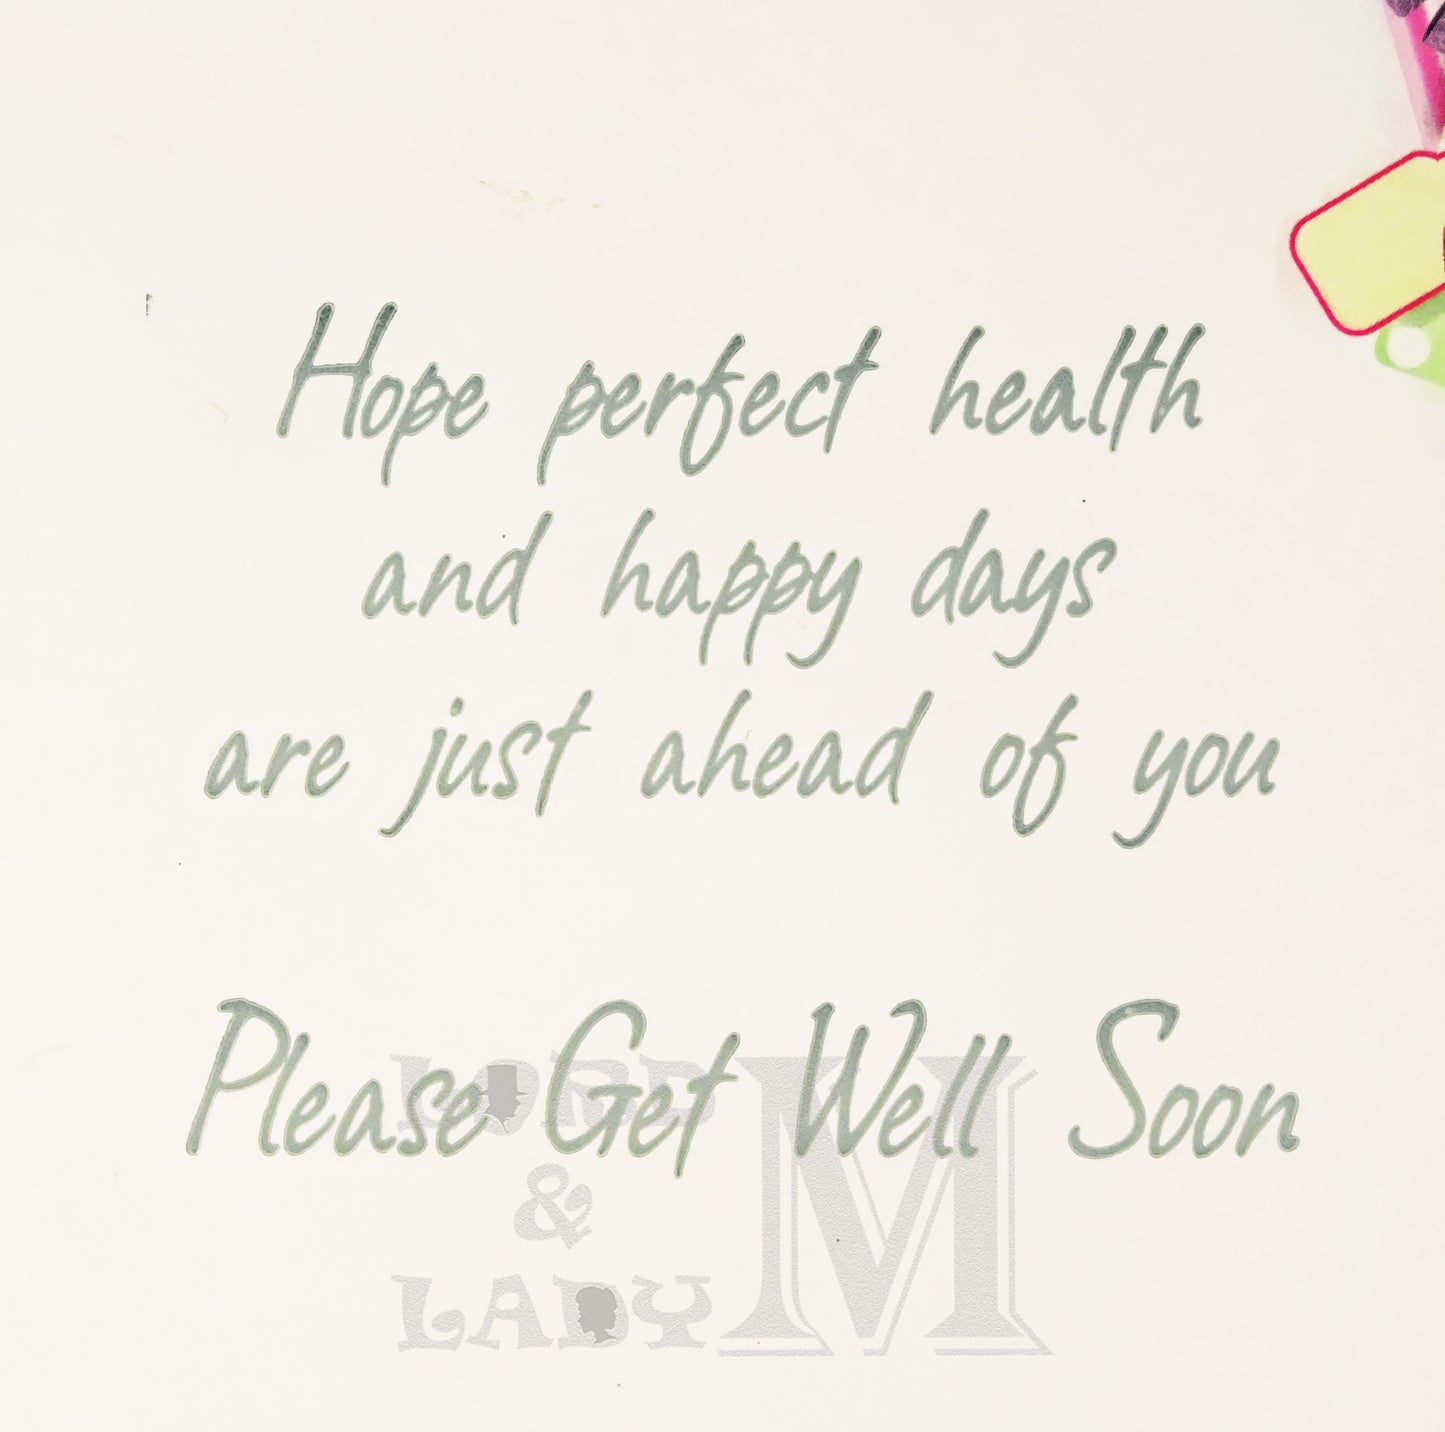 19cm - Get Well Soon Especially For You - CWH